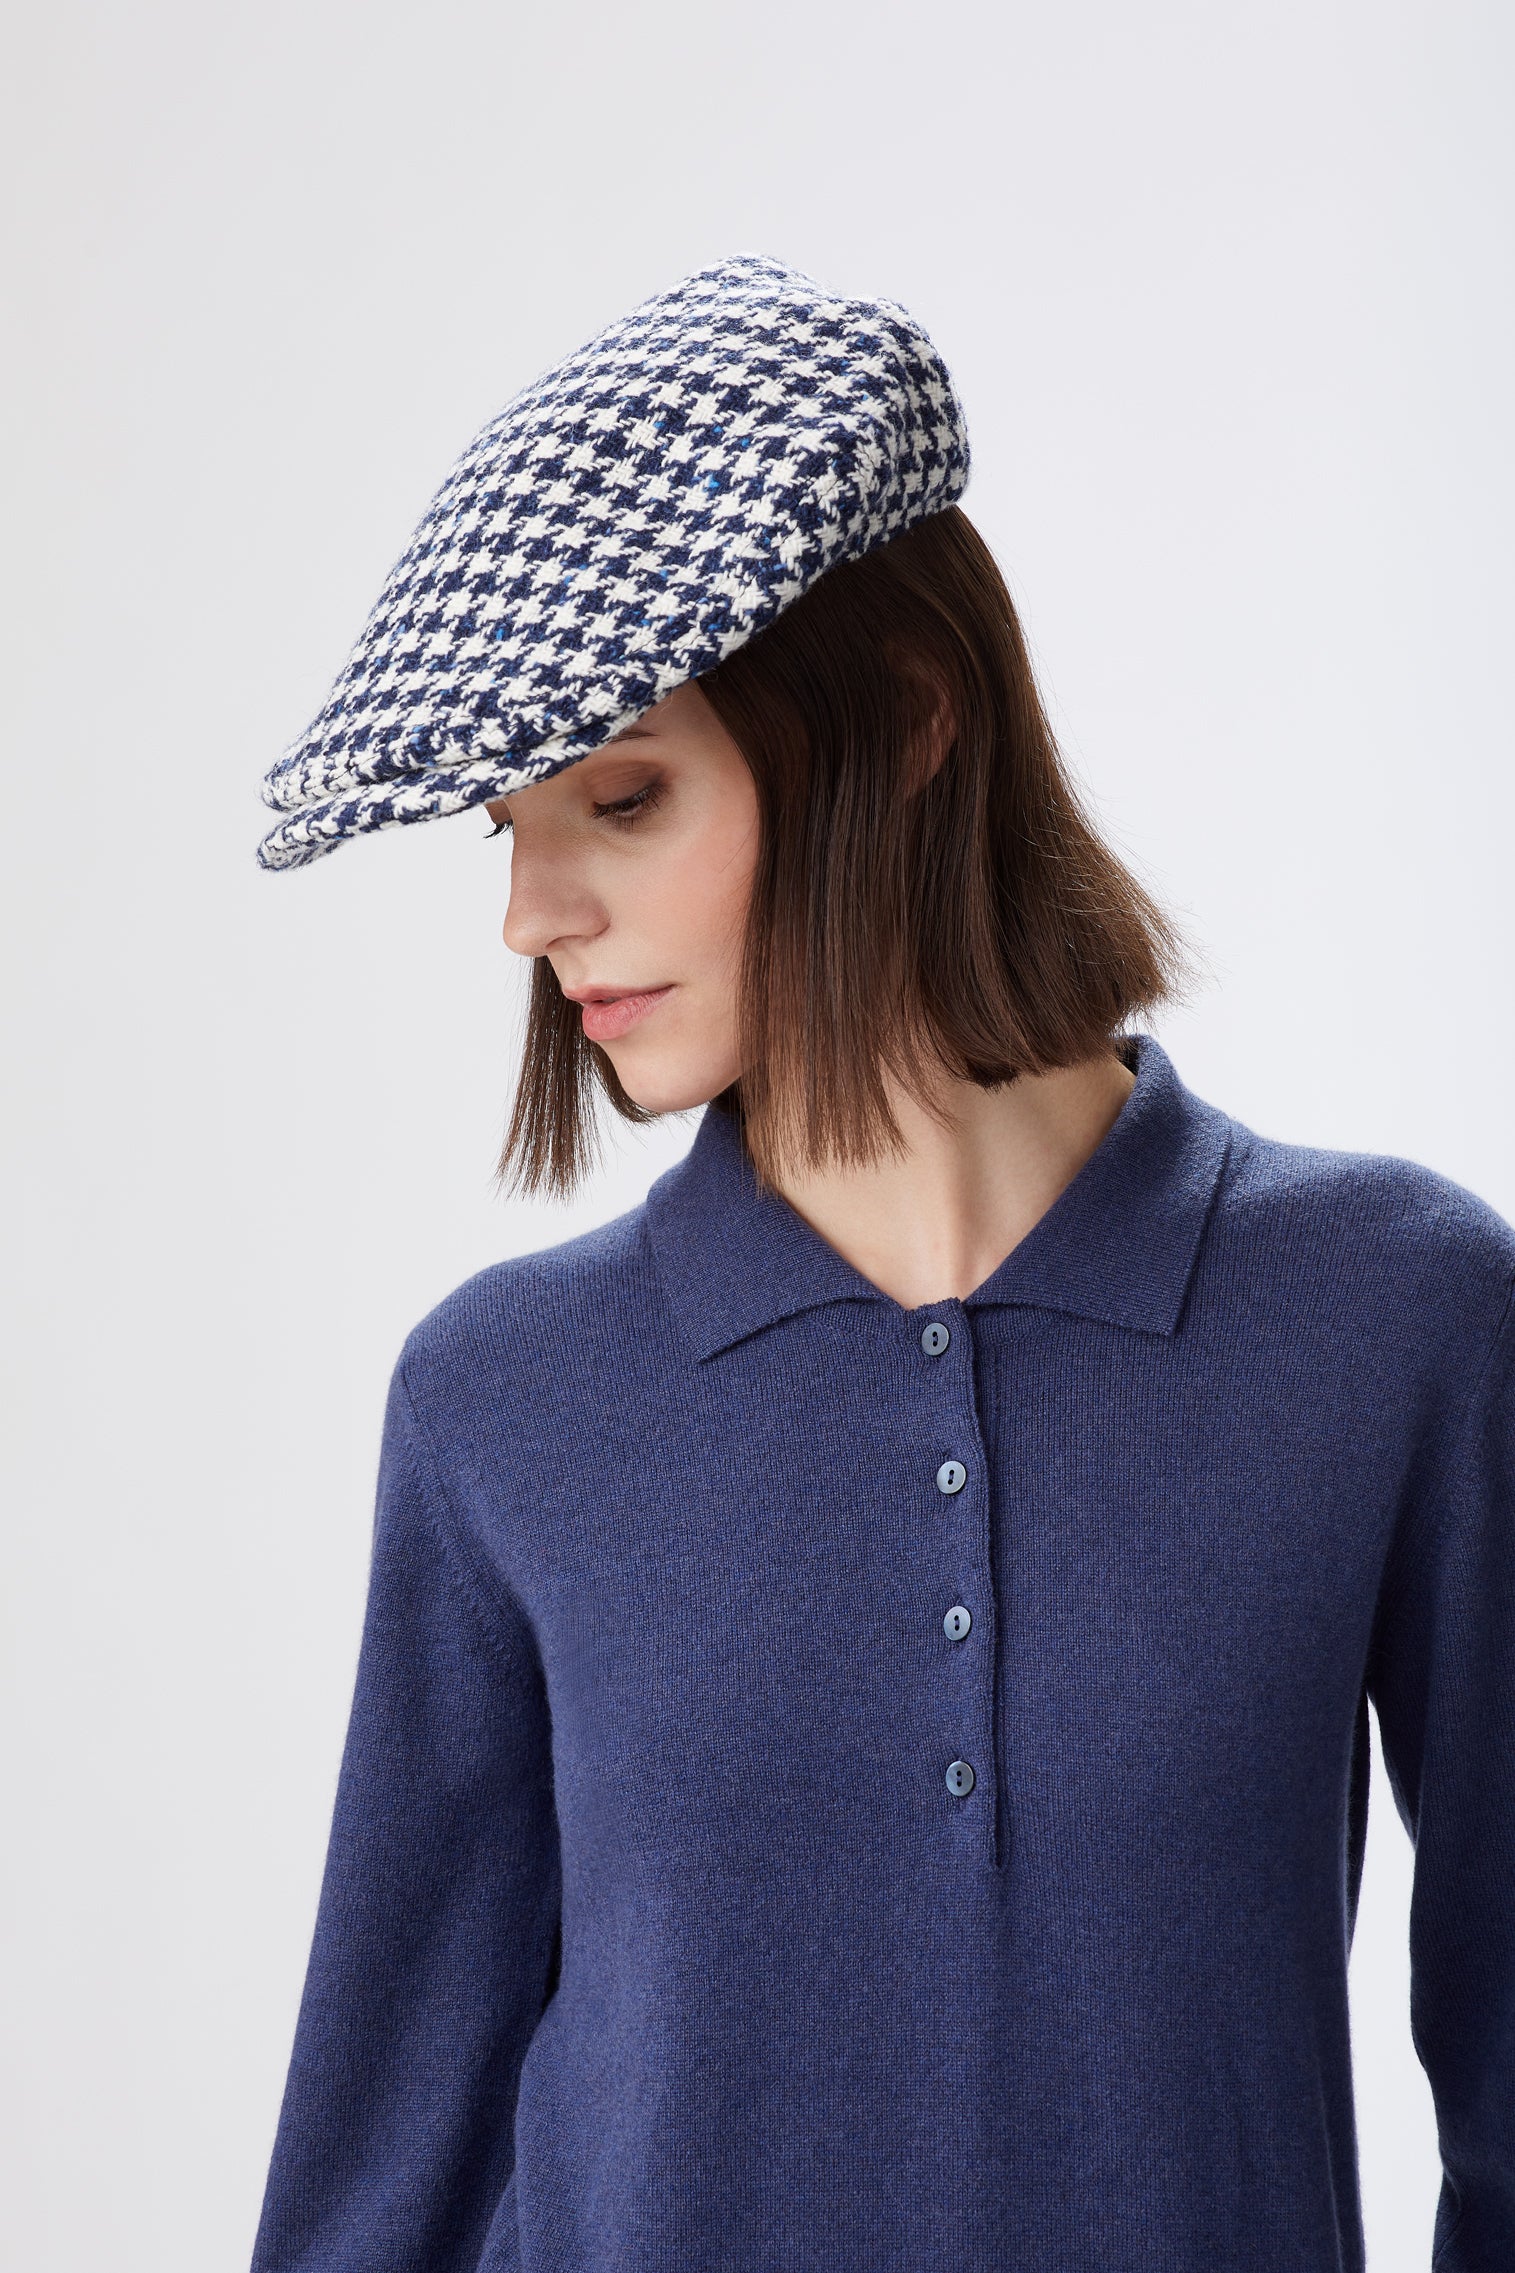 Turnberry Houndstooth Flat Cap - Limited Edition Collection - Lock & Co. Hatters London UK